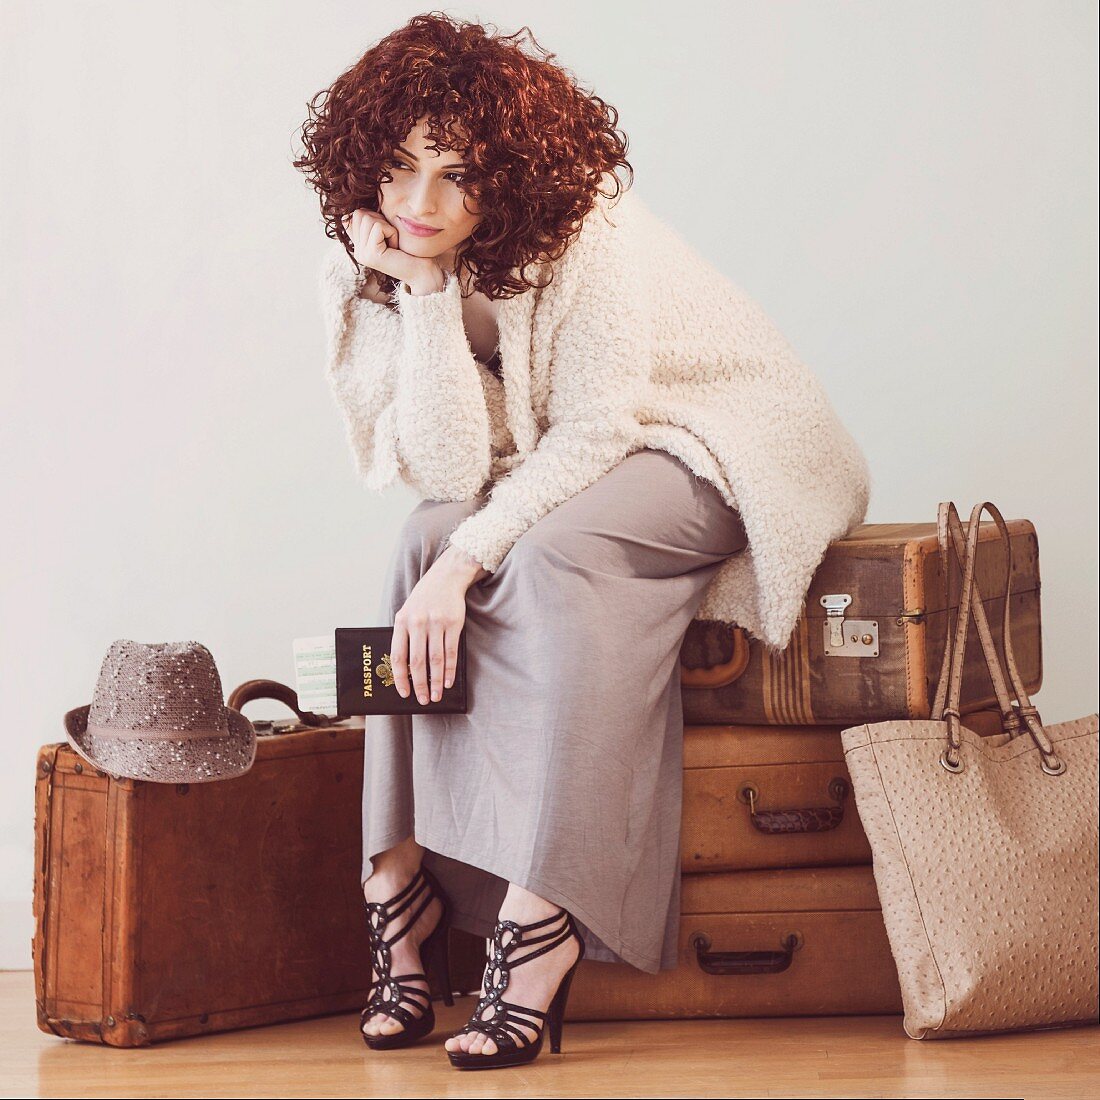 Fashionably dressed young woman sitting, waiting, on suitcases